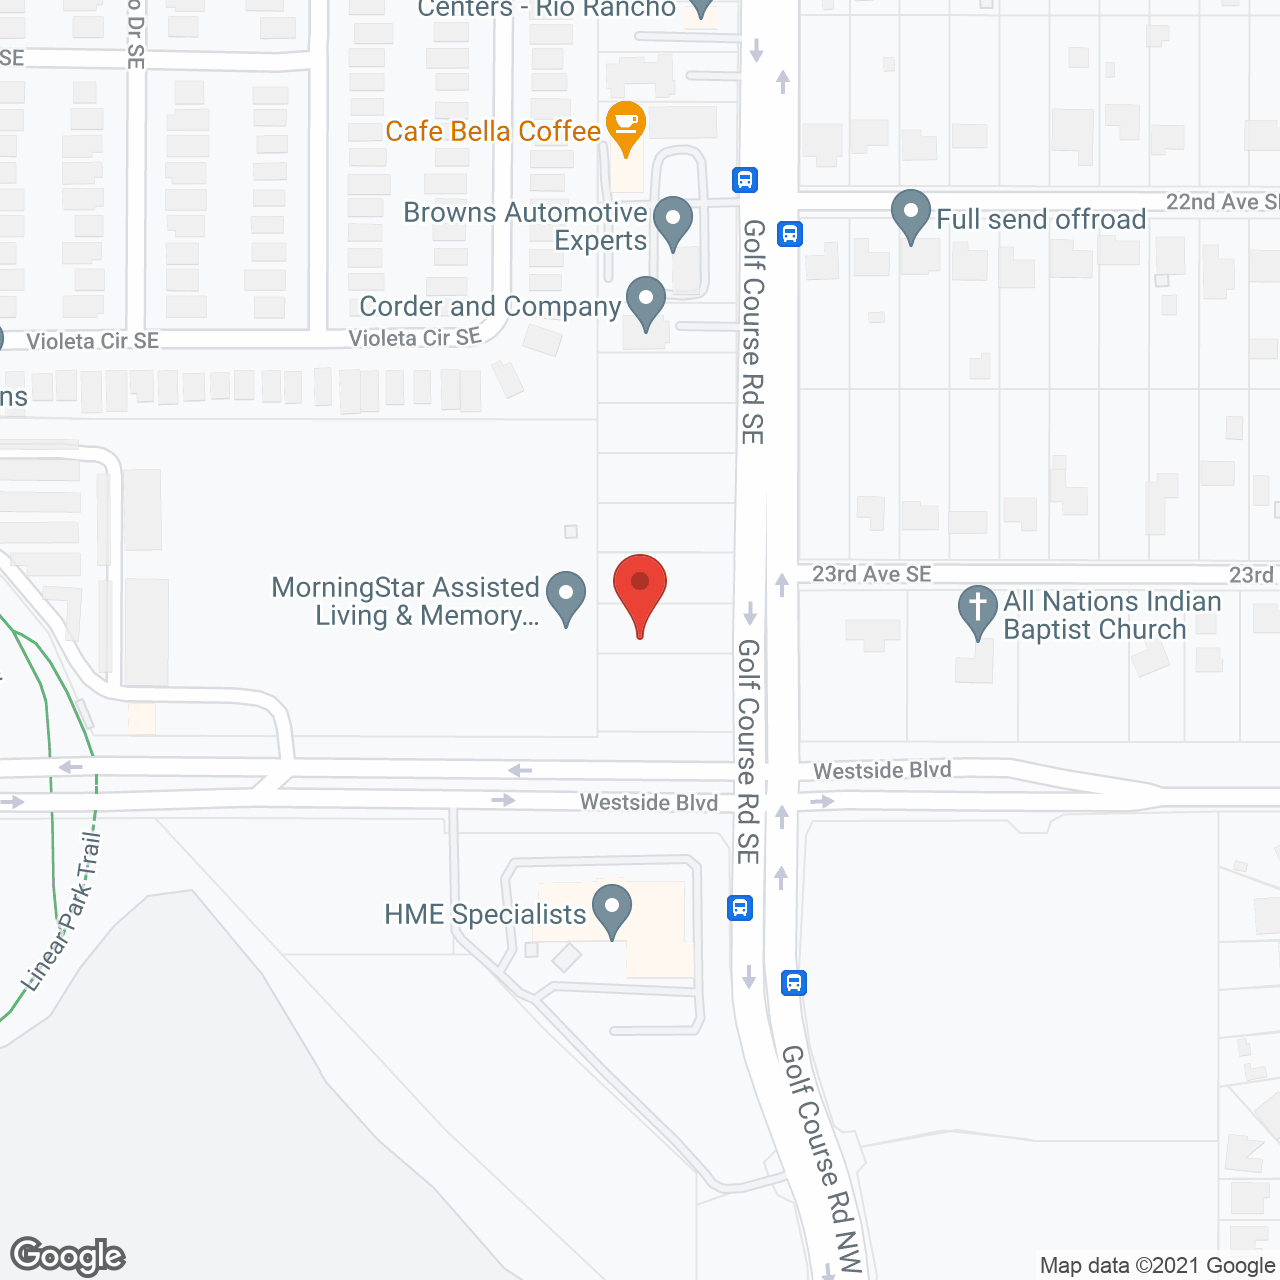 MorningStar Assisted Living & Memory Care of Rio Rancho in google map